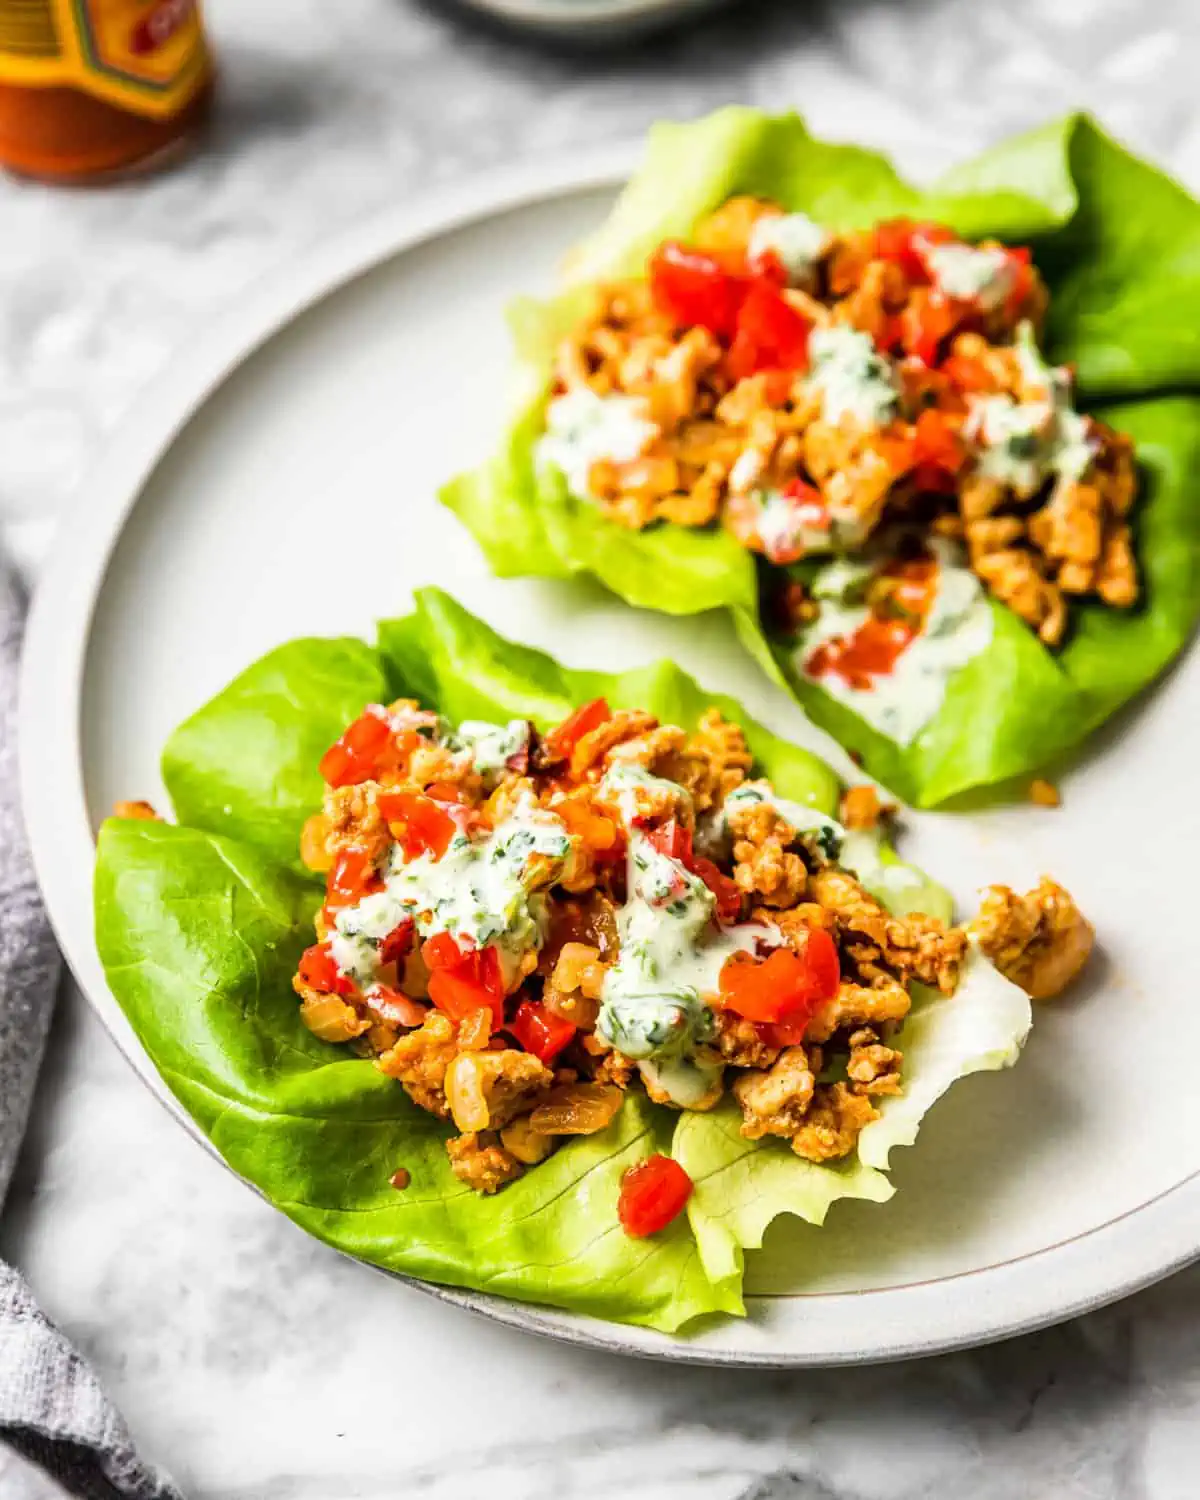 two lettuce wraps filled with ground chicken taco meat, tomatoes, and crema.